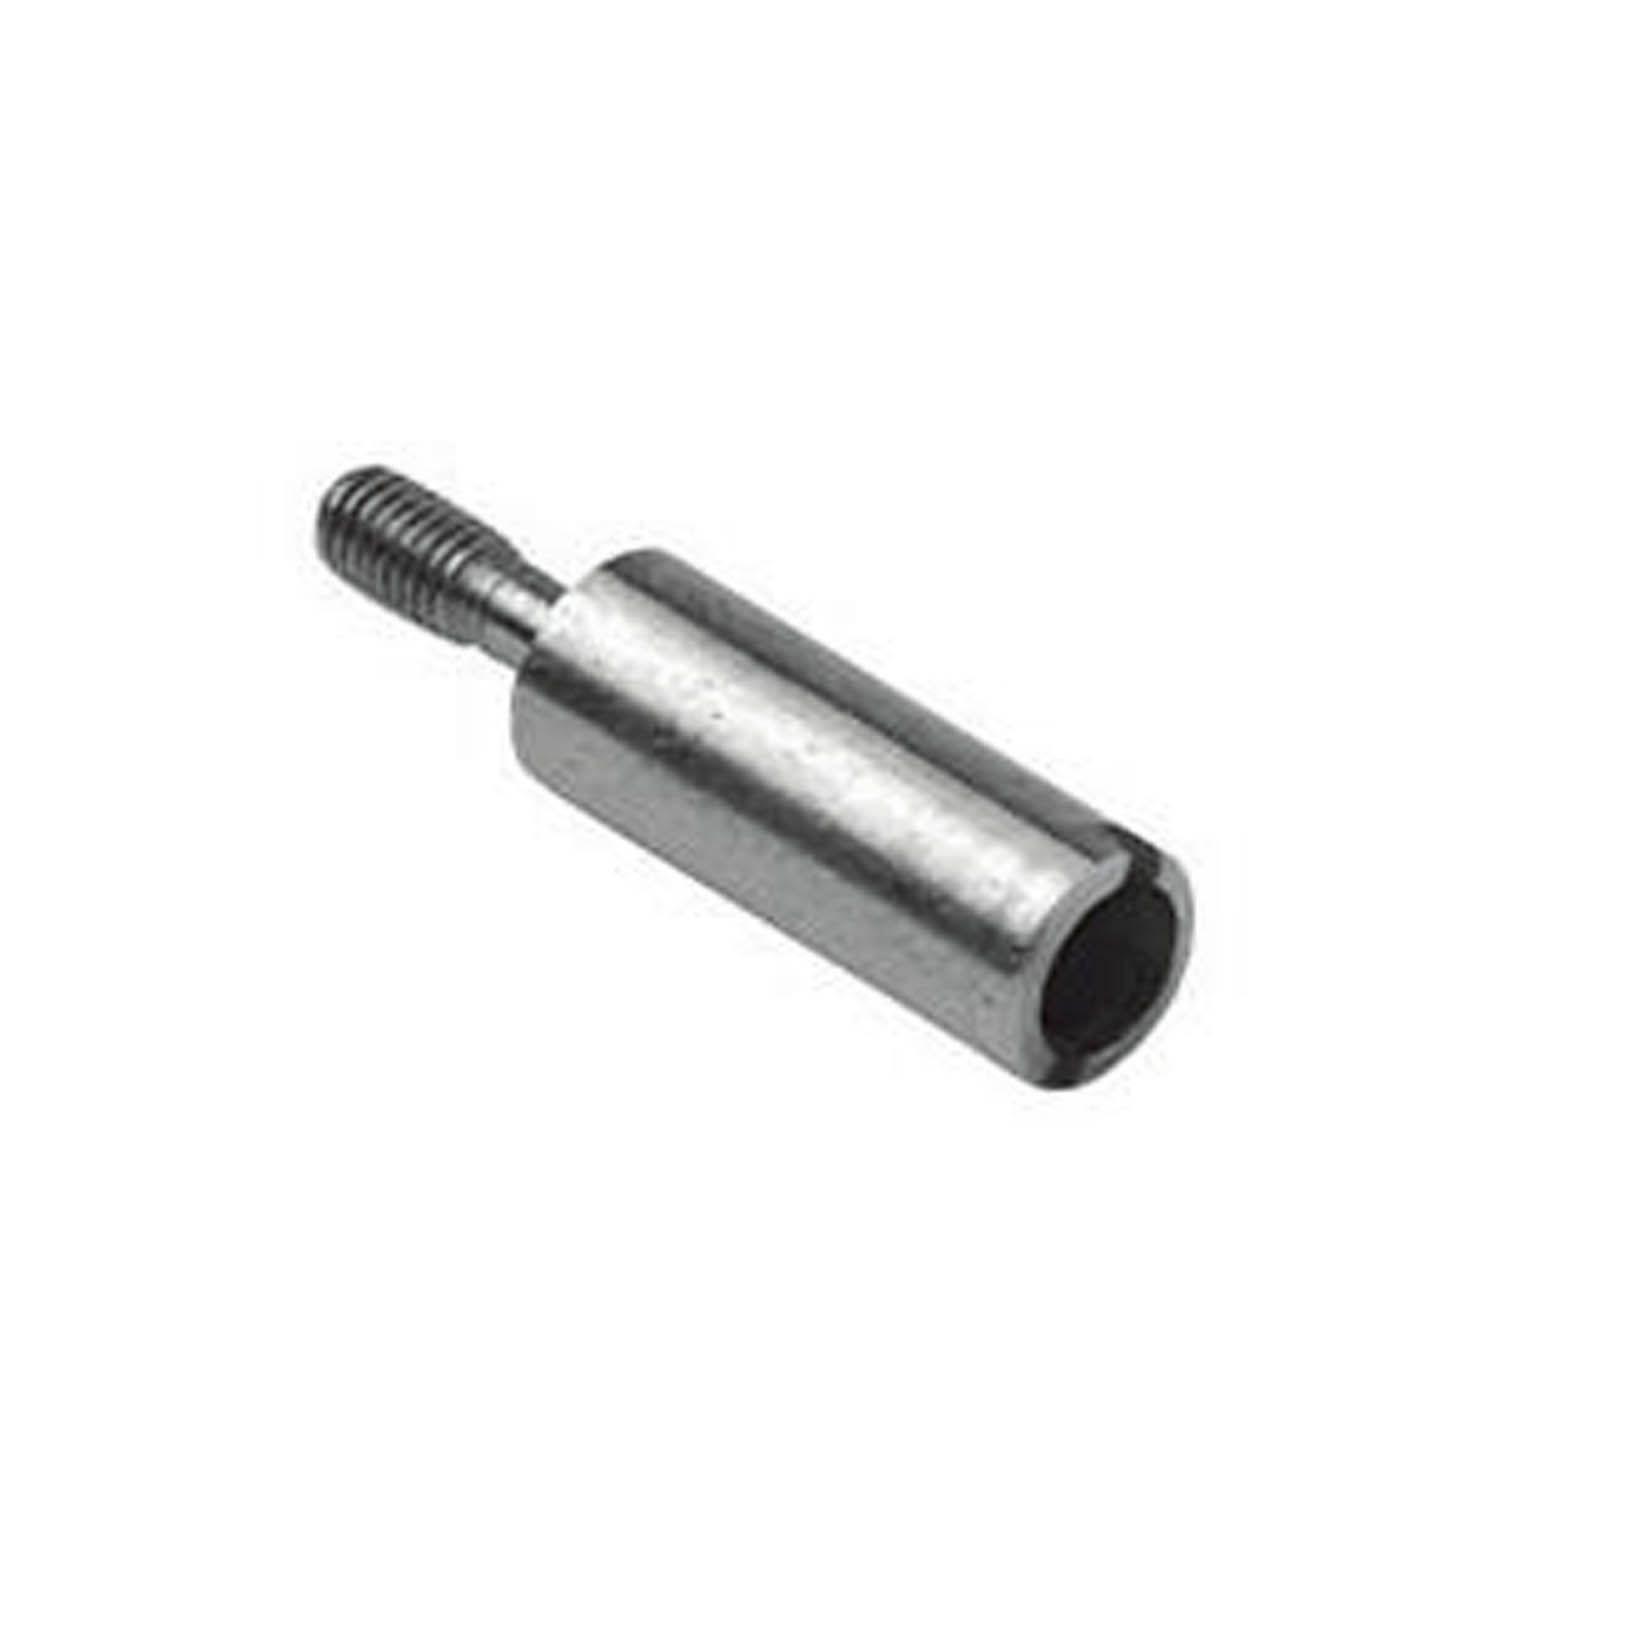 Mencom CRF-CX Stainless Steel Female Coding Pin for MIXO